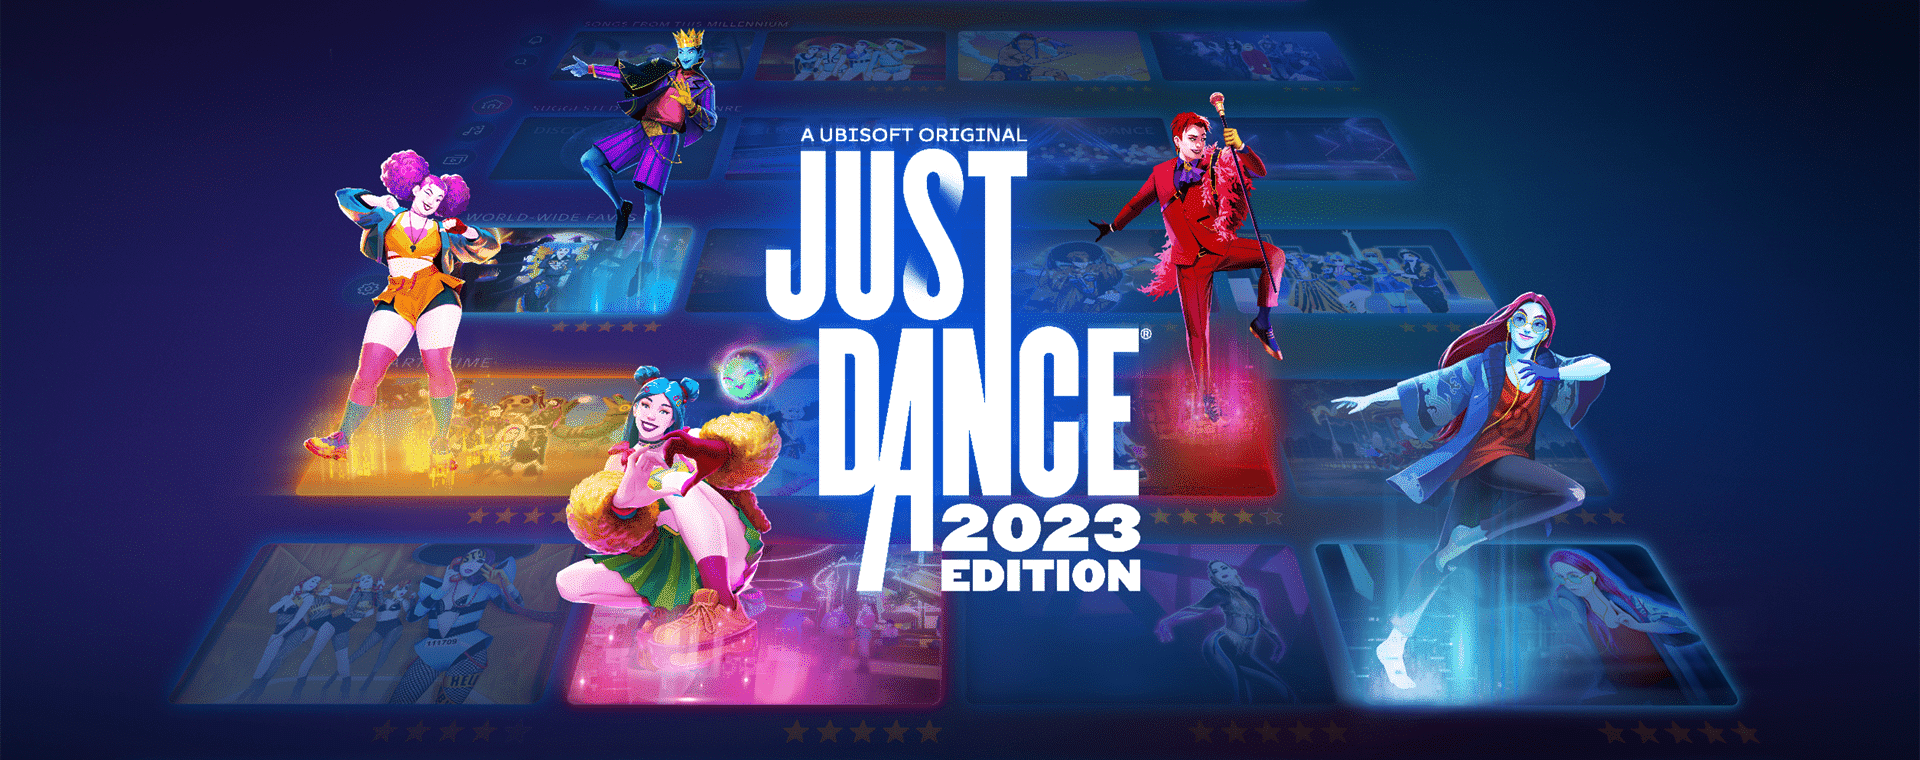 sovjetisk petulance raid Review: Just Dance 2023 is a new chapter for the franchise